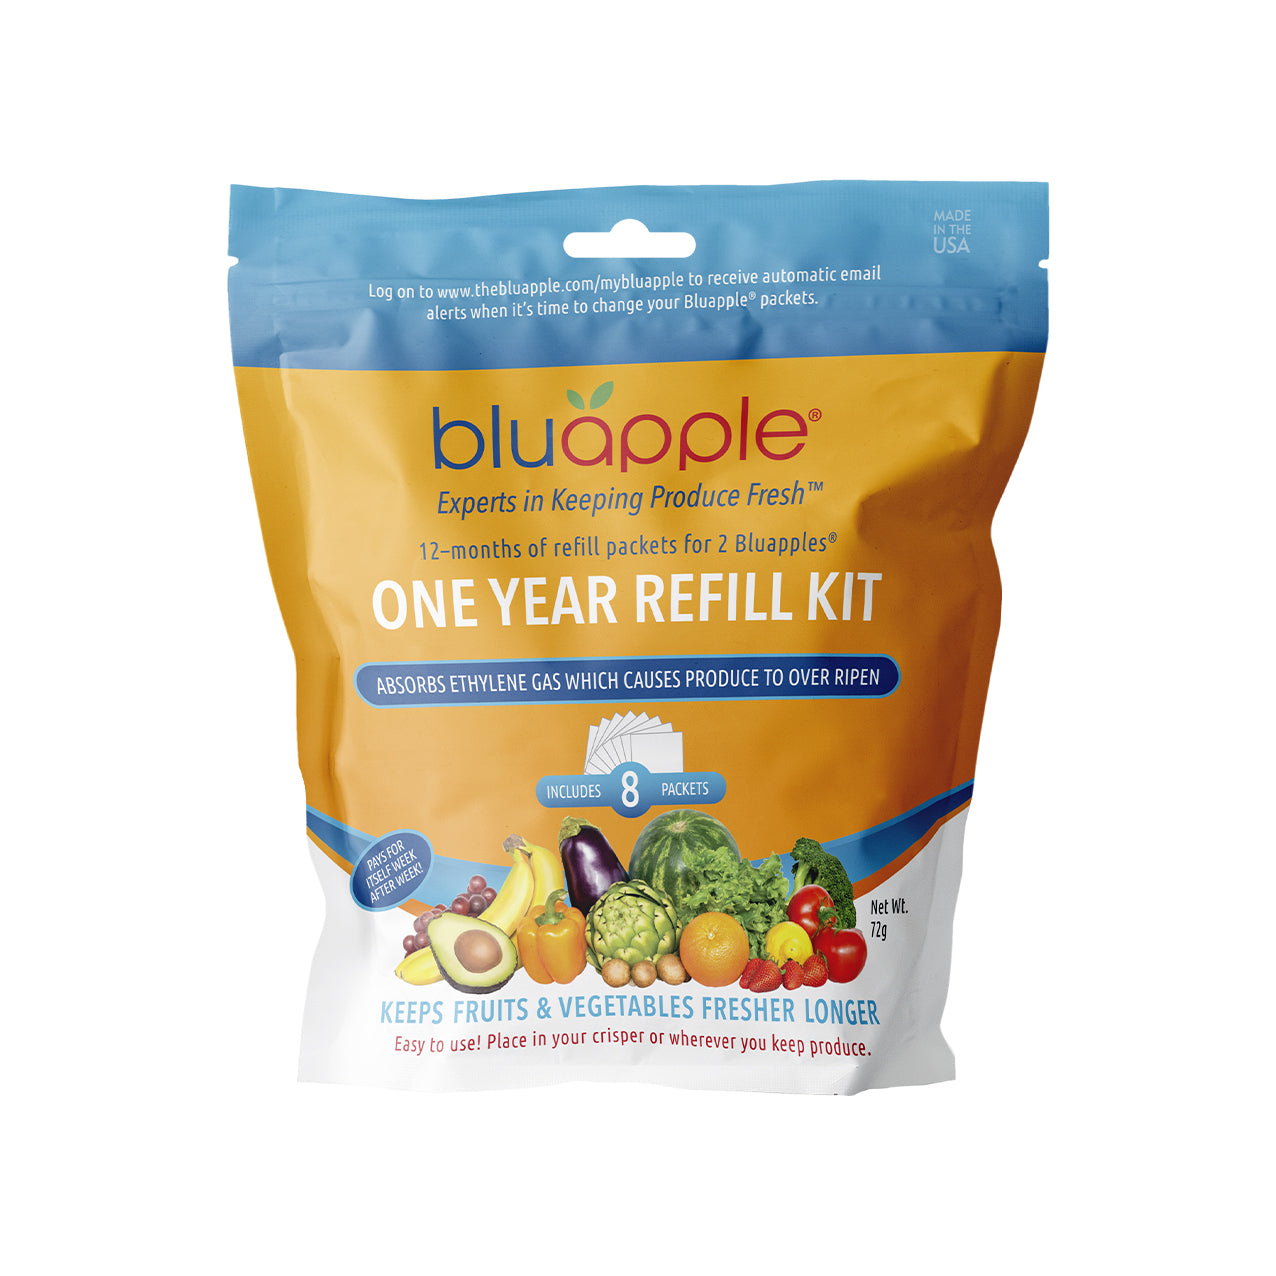 Bluapple 1 Year Carbon Refill Kit Includes 8 Packets For 2 Bluapples With  Carbon - For 1 Full Year To Keep Produce Fresh Longer And Help Absorb